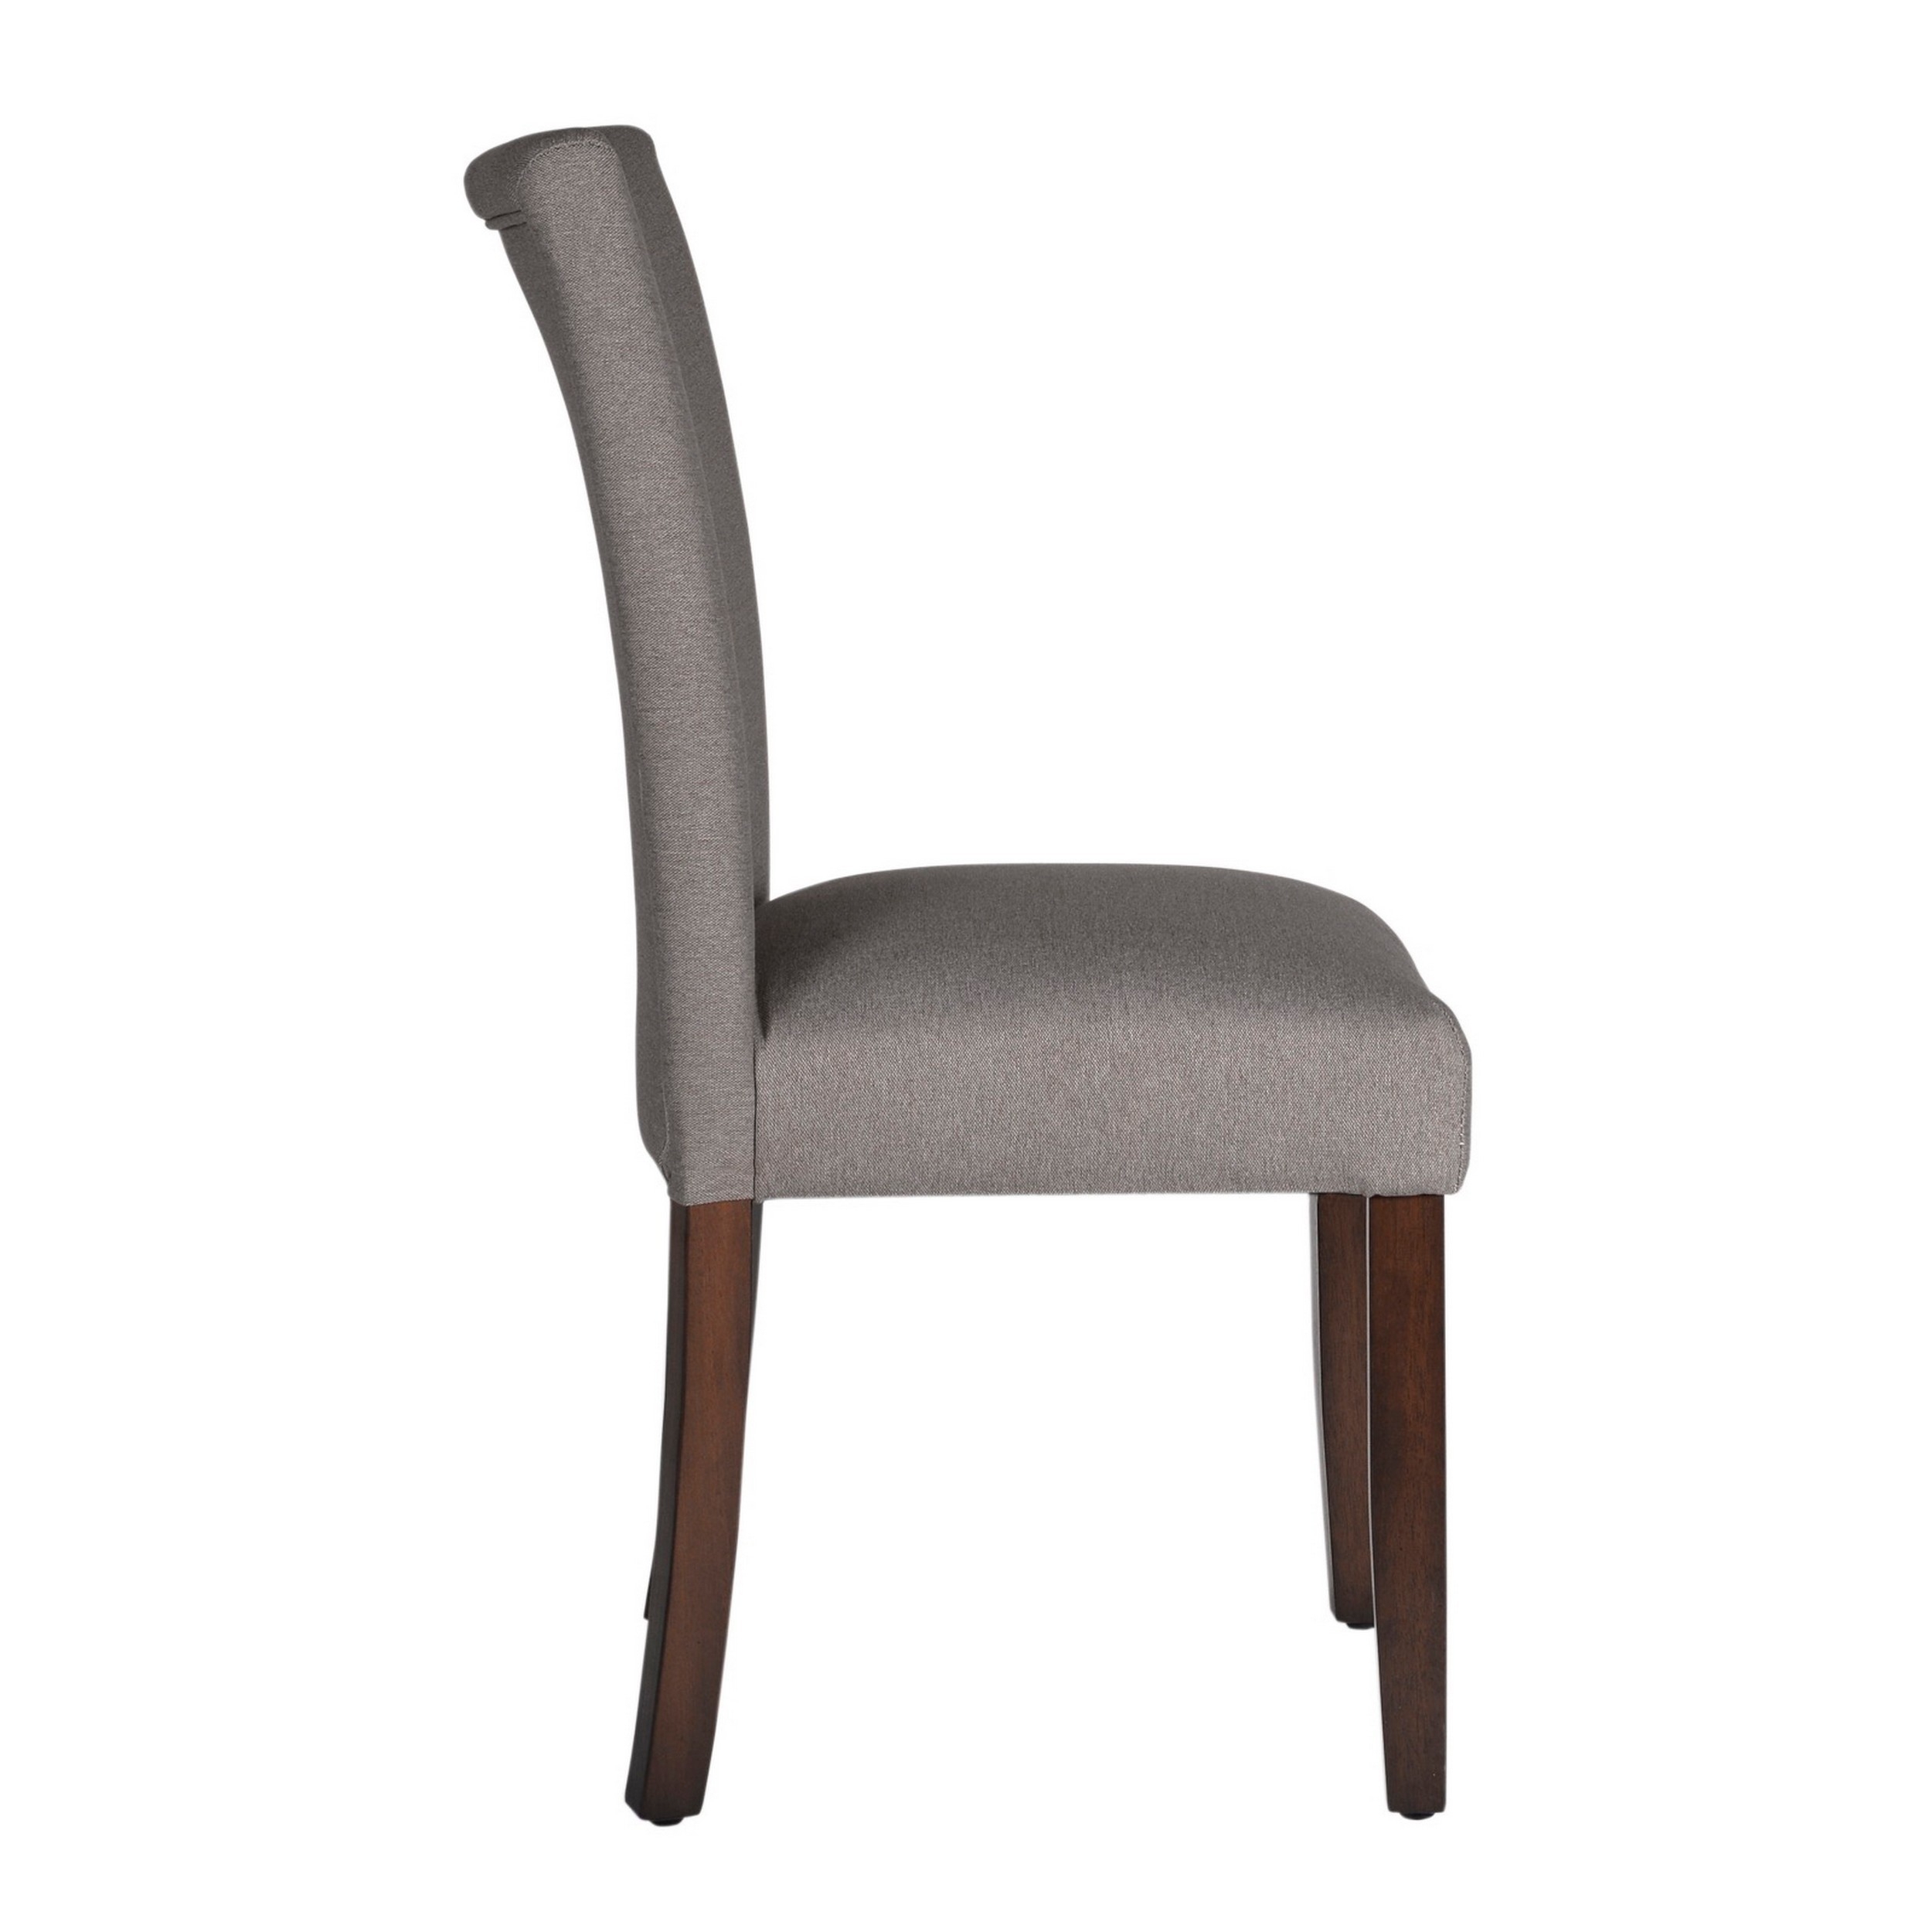 Fabric Upholstered Wooden Parson Dining Chair With Splayed Back, Gray And Brown- Saltoro Sherpi